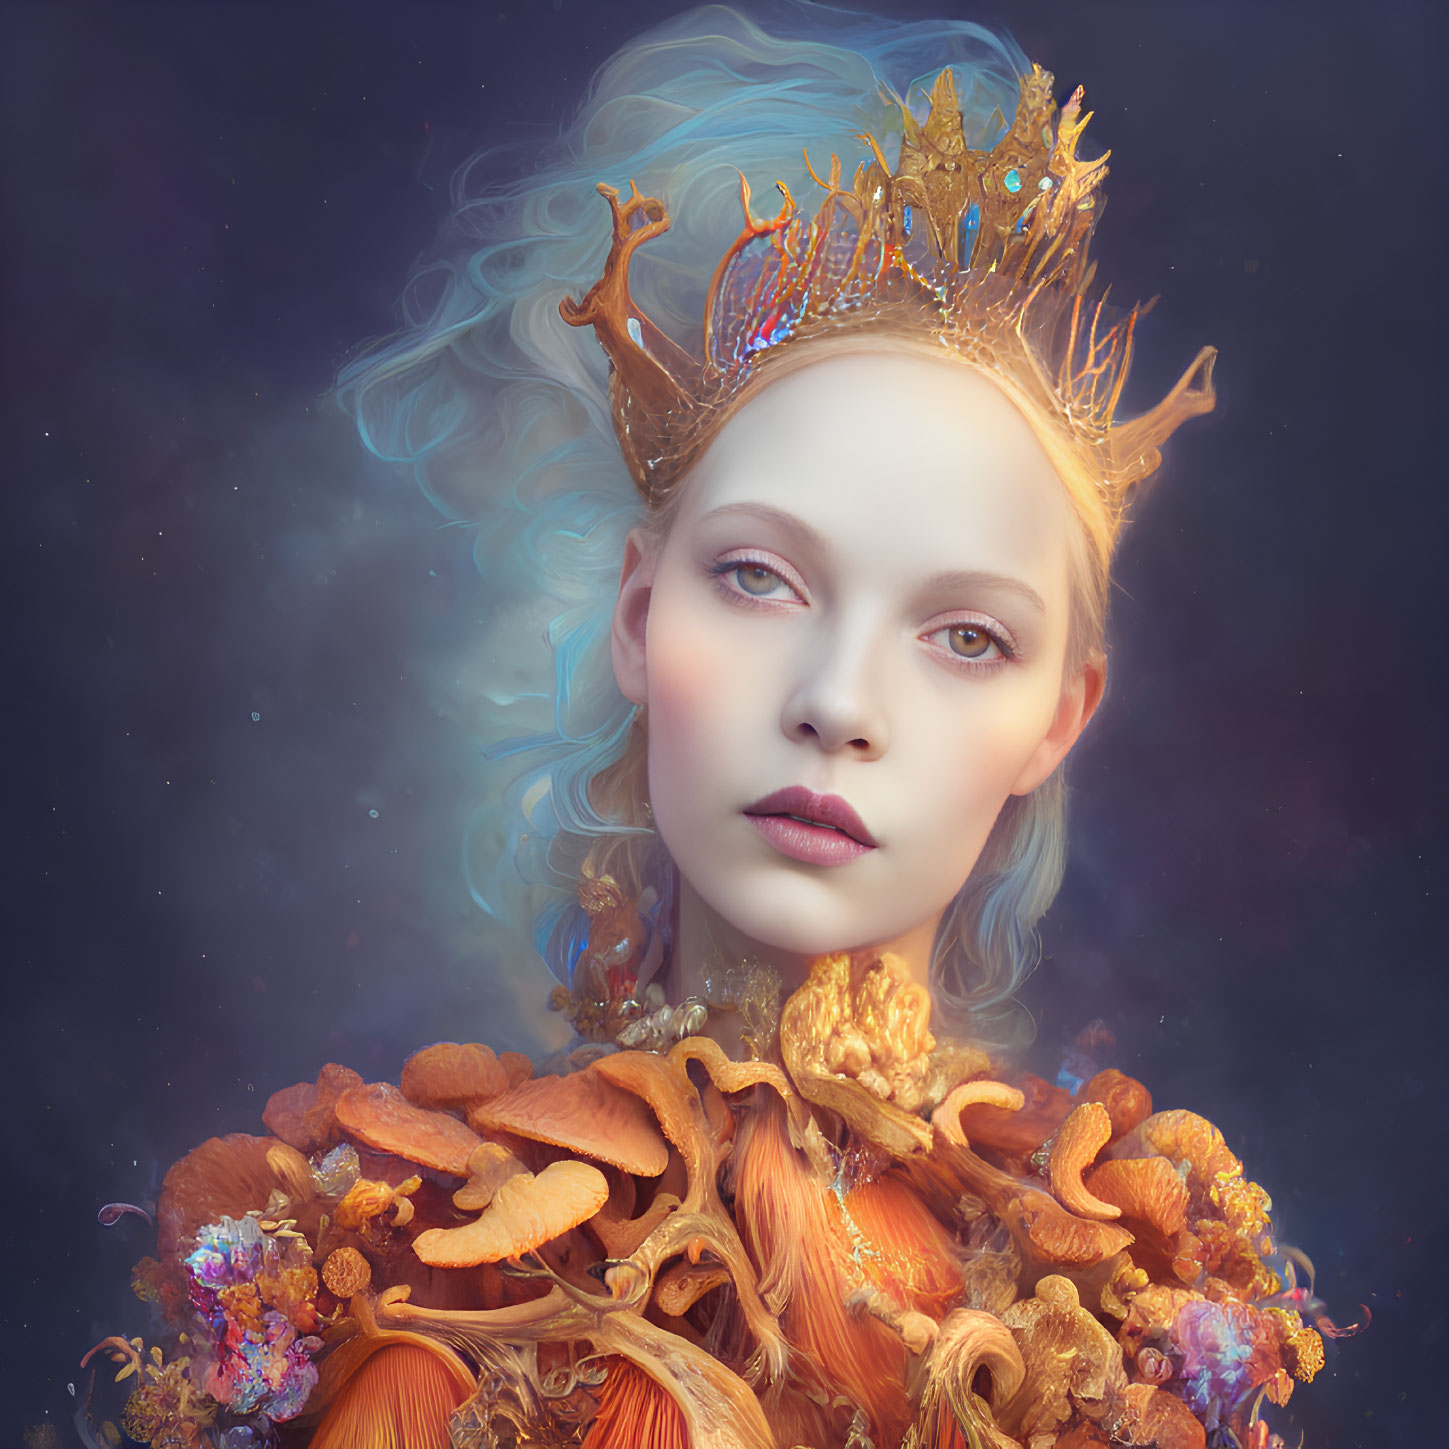 Surreal portrait of woman with golden crown and coral-like adornments